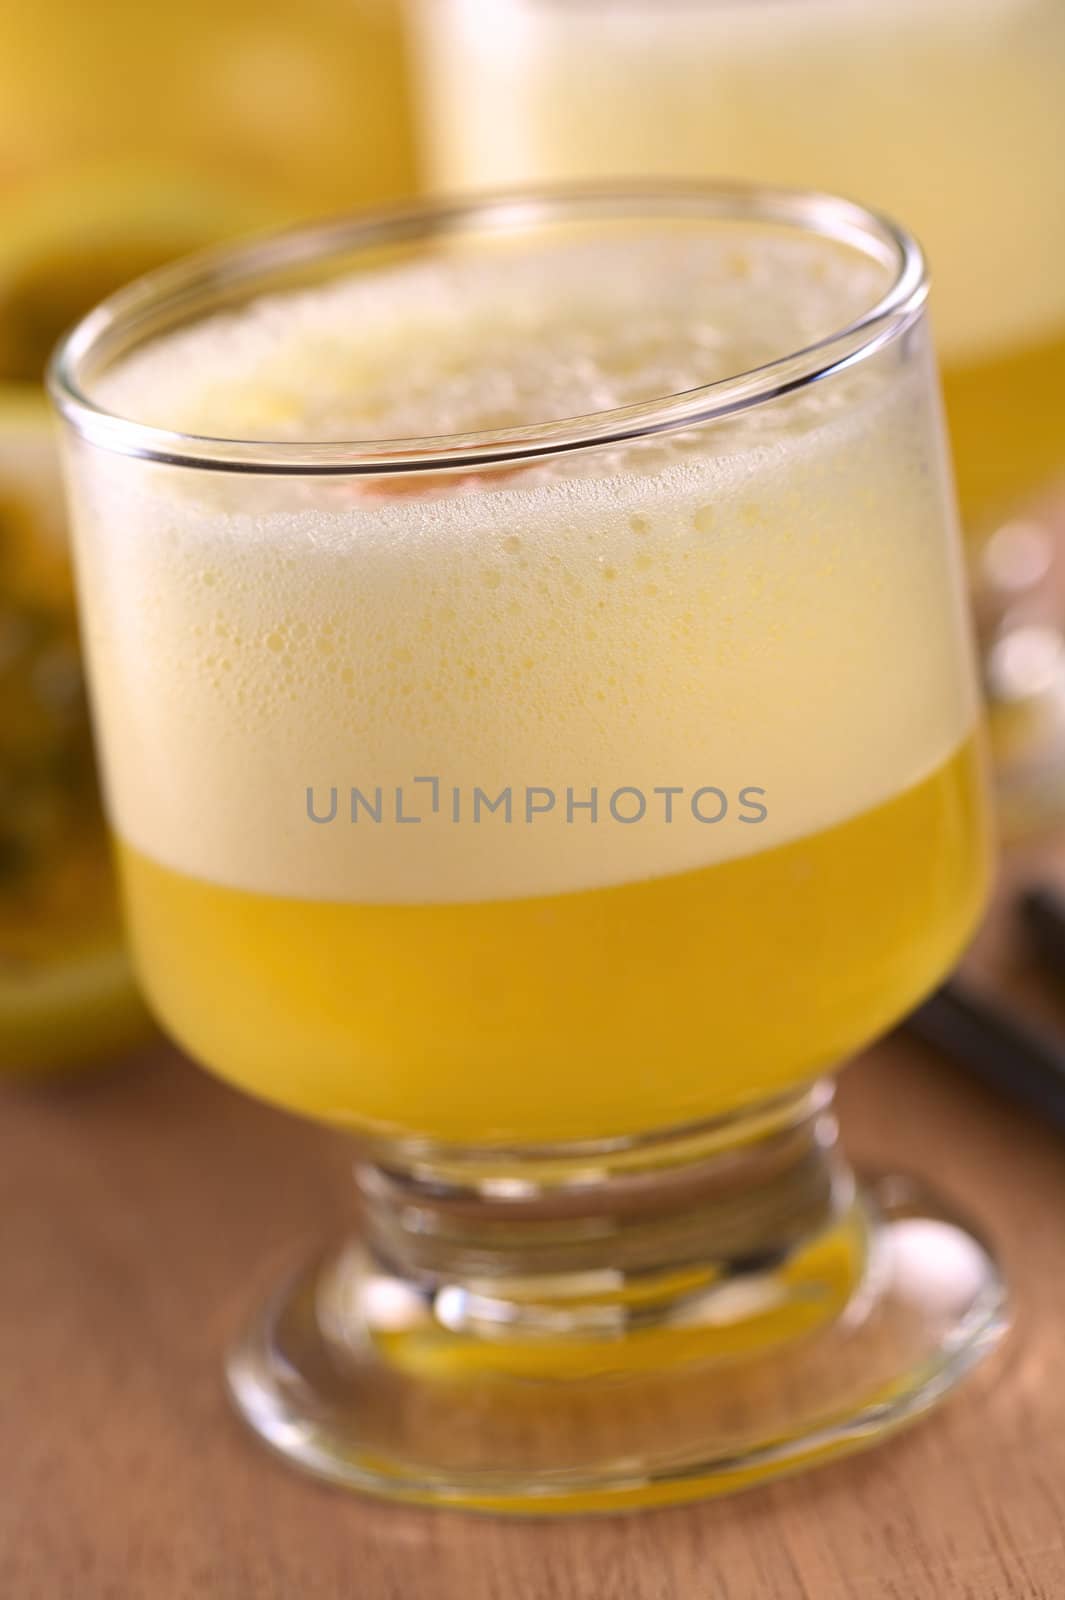 Maracuya Sour, a popular Peruvian cocktail made of maracuya and lime juice, pisco, syrup and egg white (Selective Focus, Focus on the front of the glass rim)